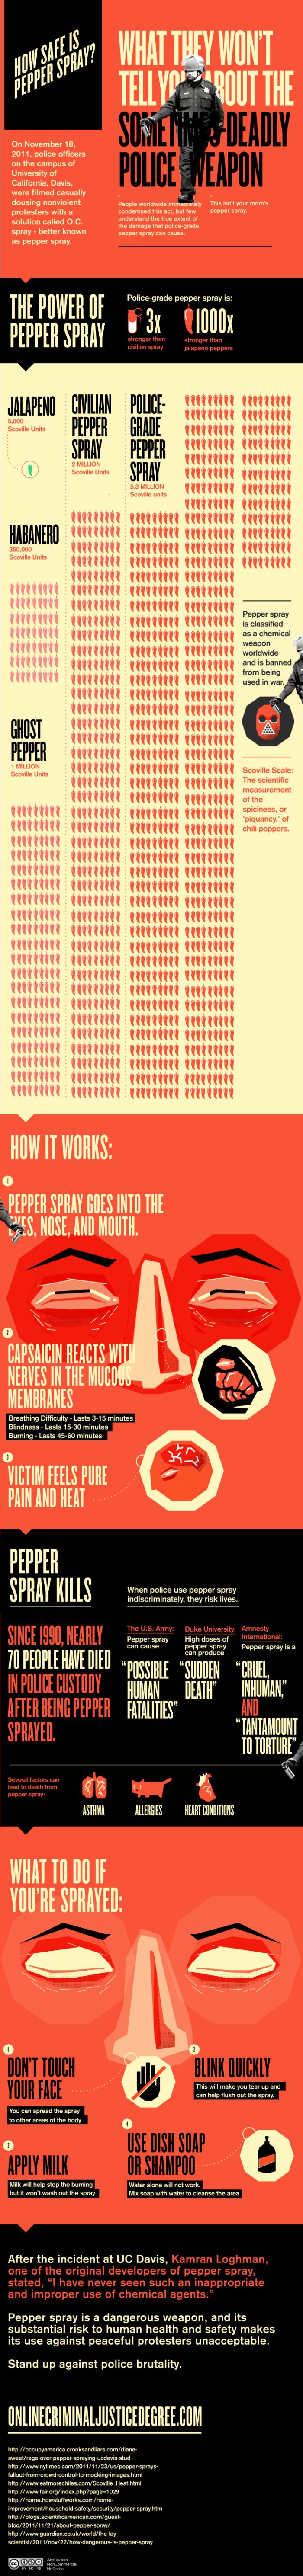 How Safe is Pepper Spray